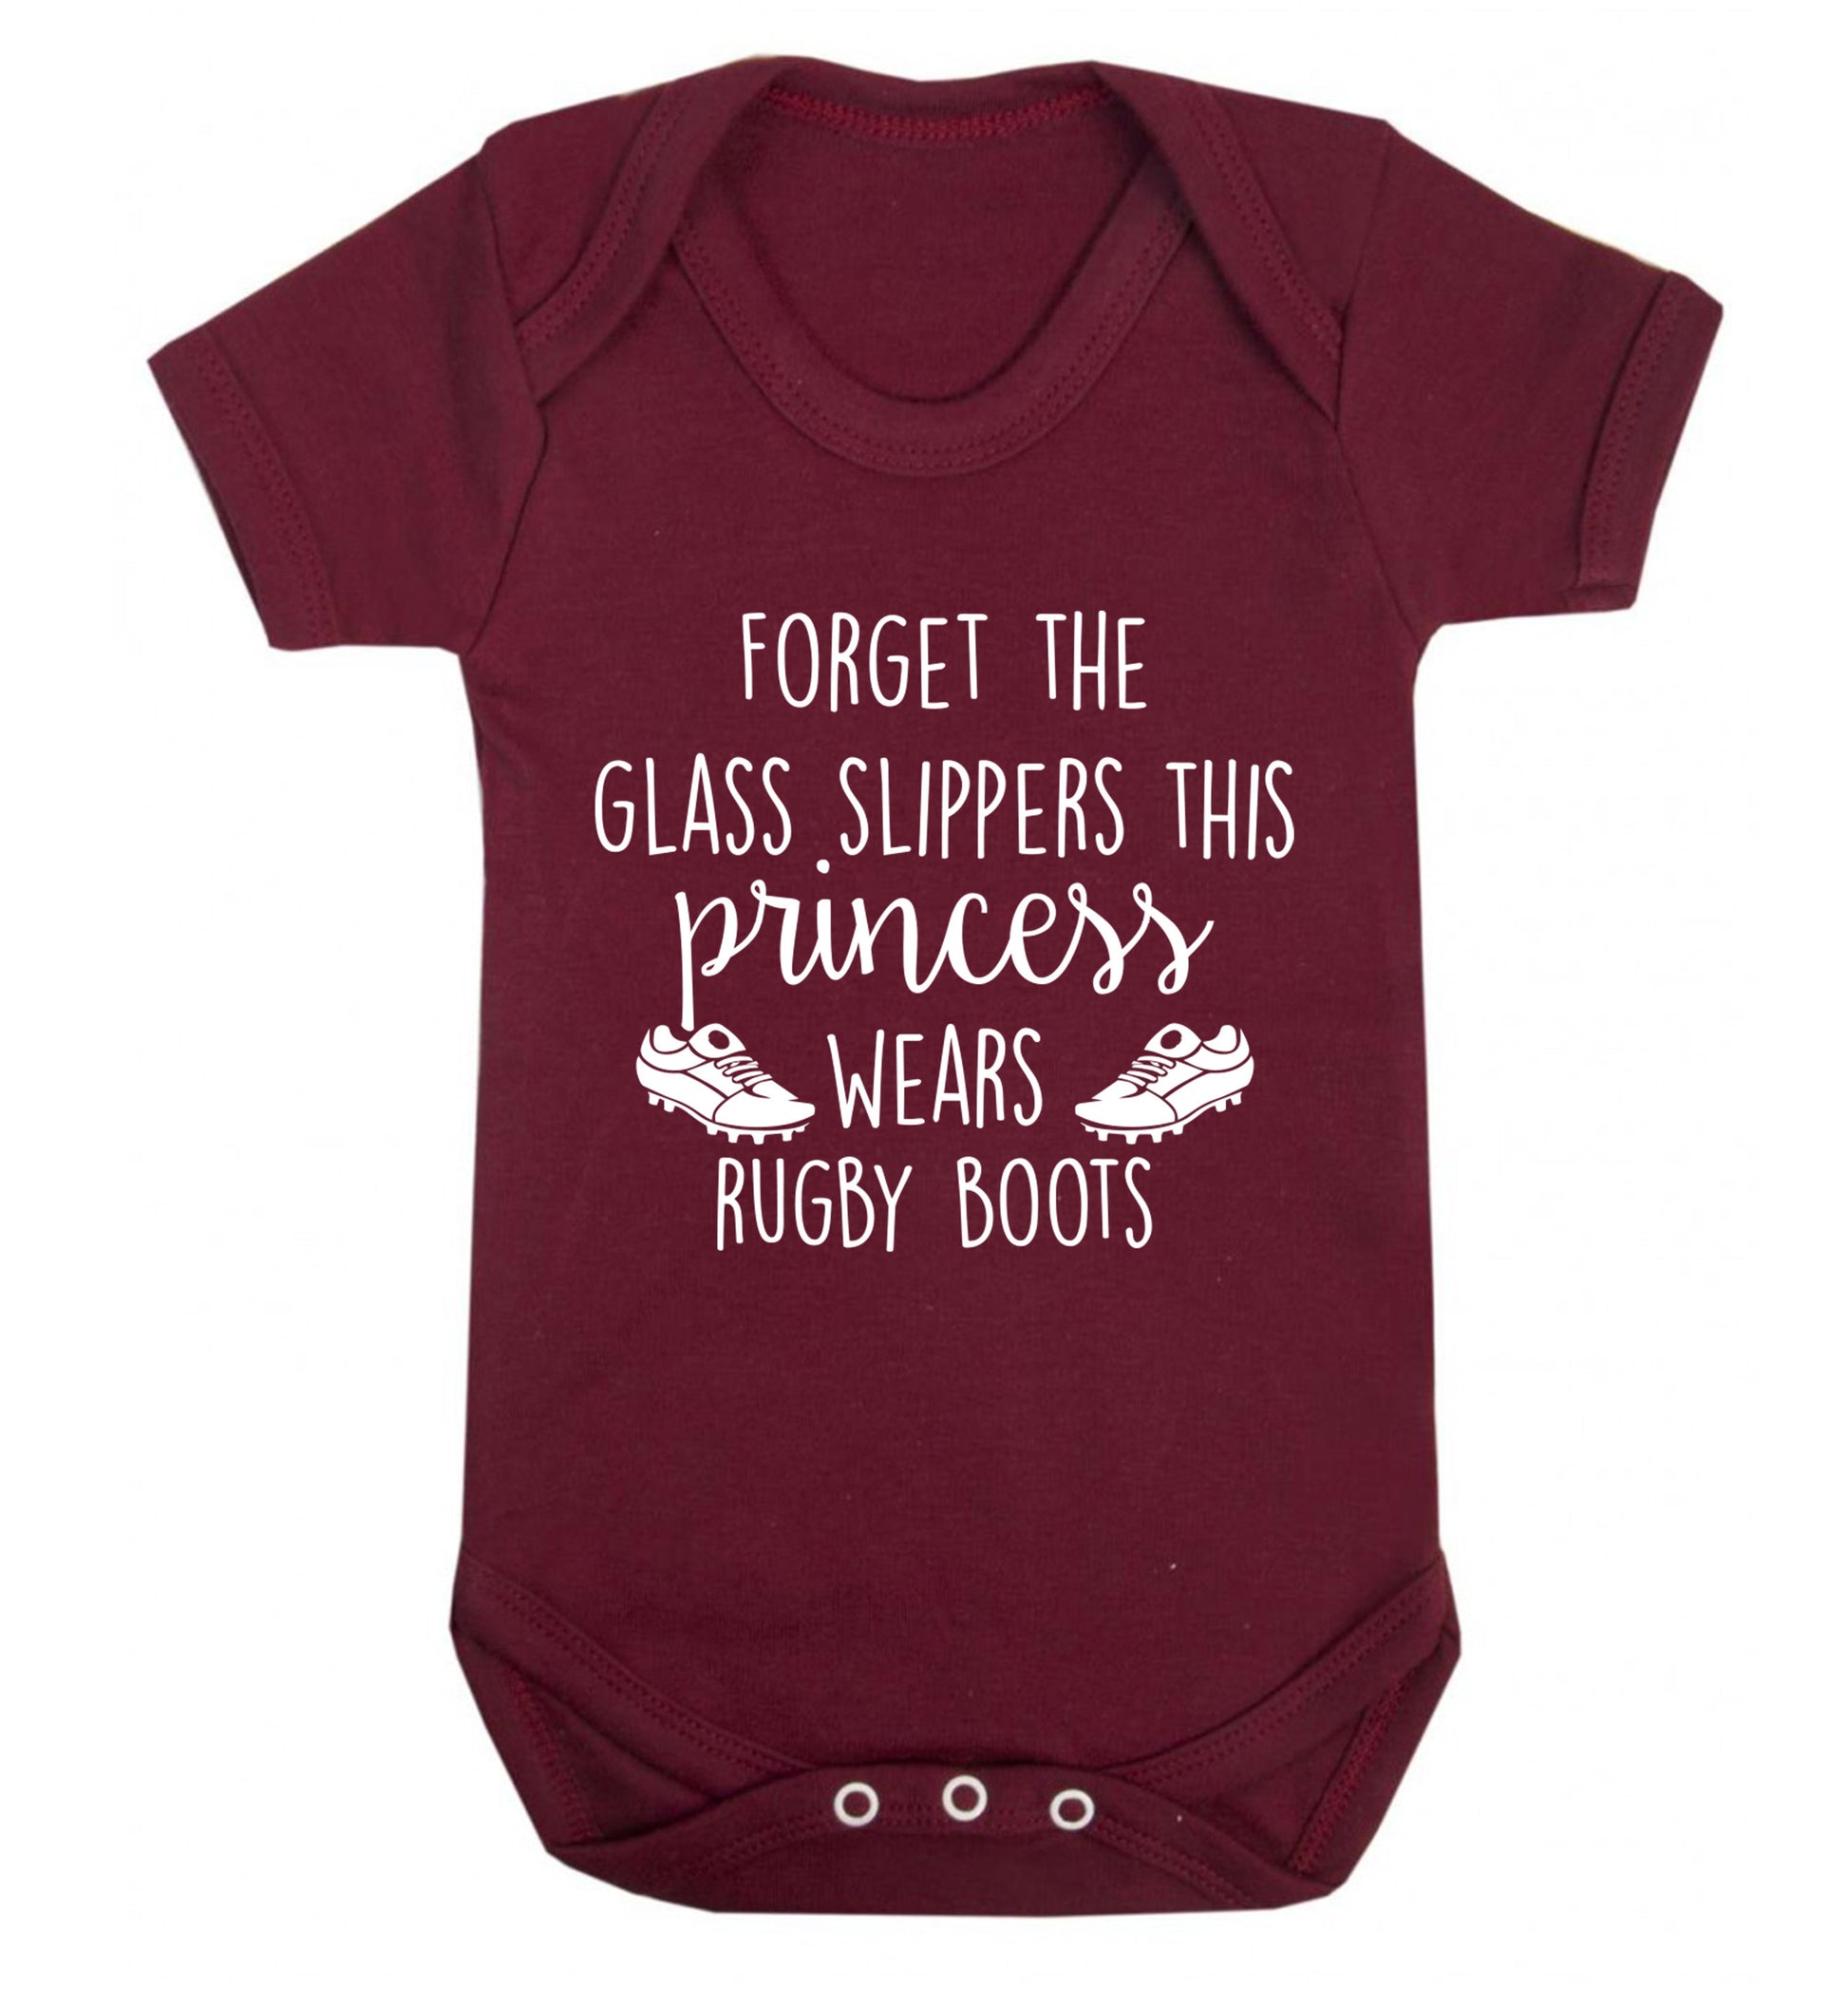 Forget the glass slippers this princess wears rugby boots Baby Vest maroon 18-24 months